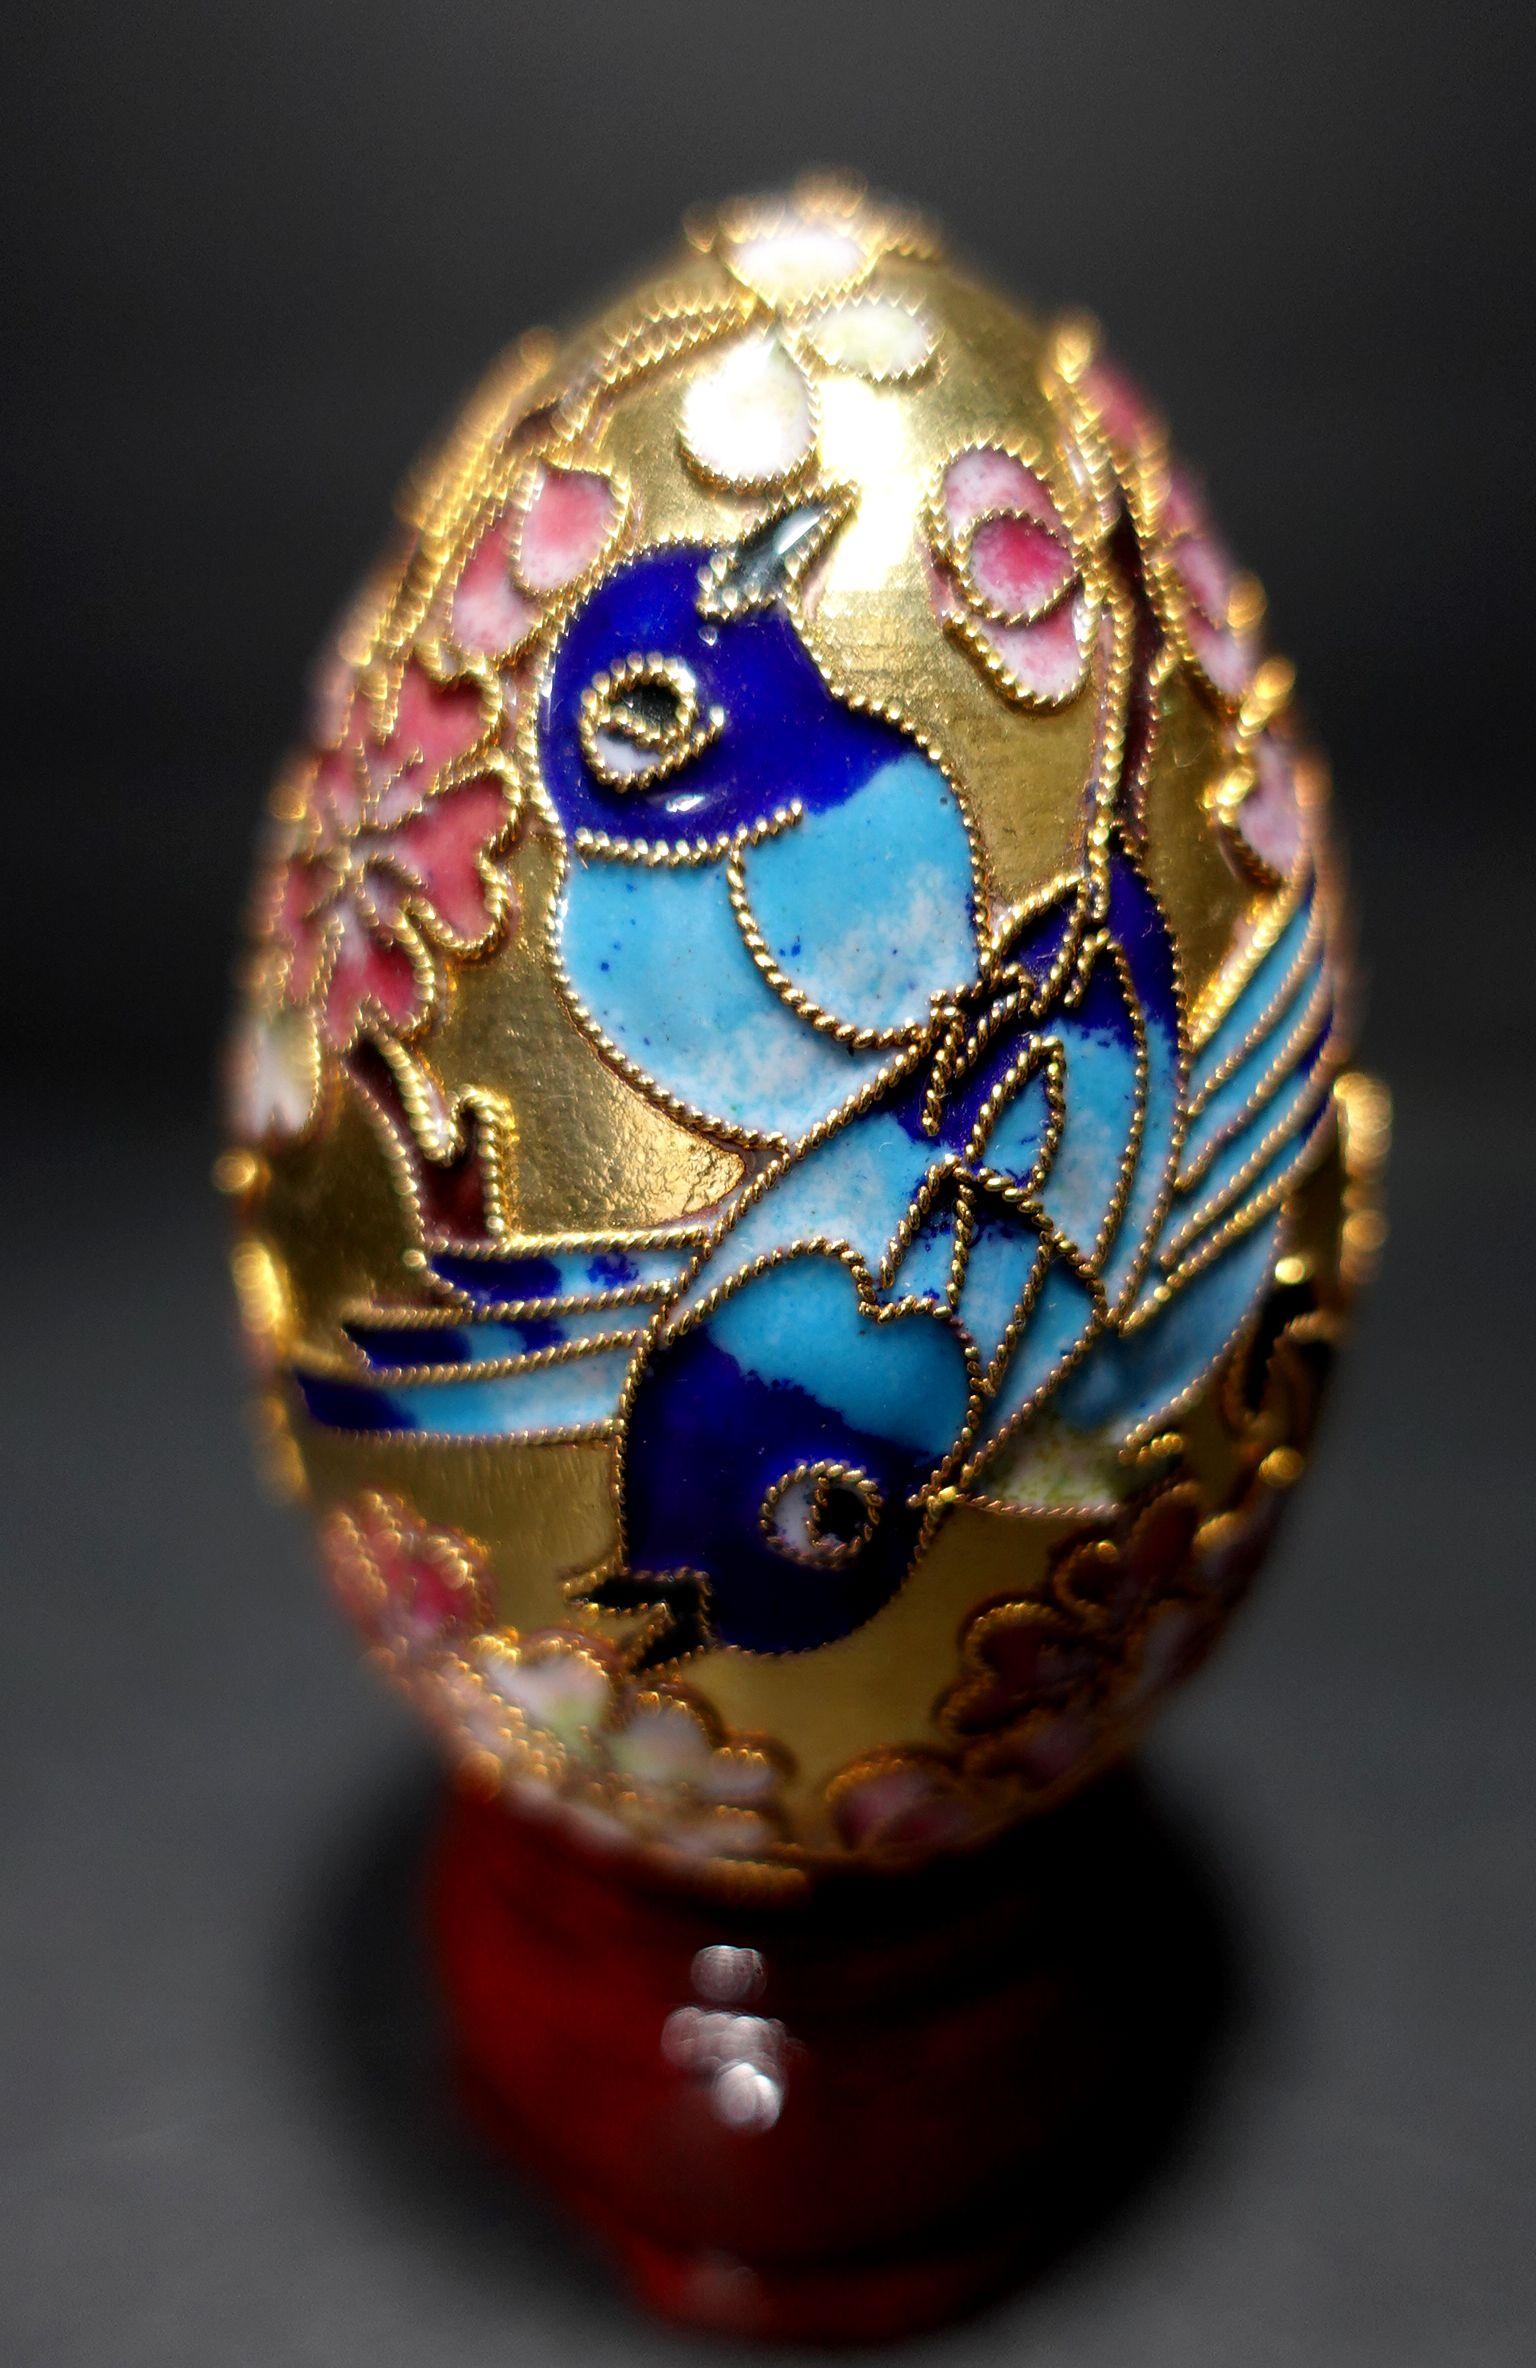 Presenting a cute Chinese cloisonné enamel egg depicting two Blue Birds with a wood stand, early 20 century.